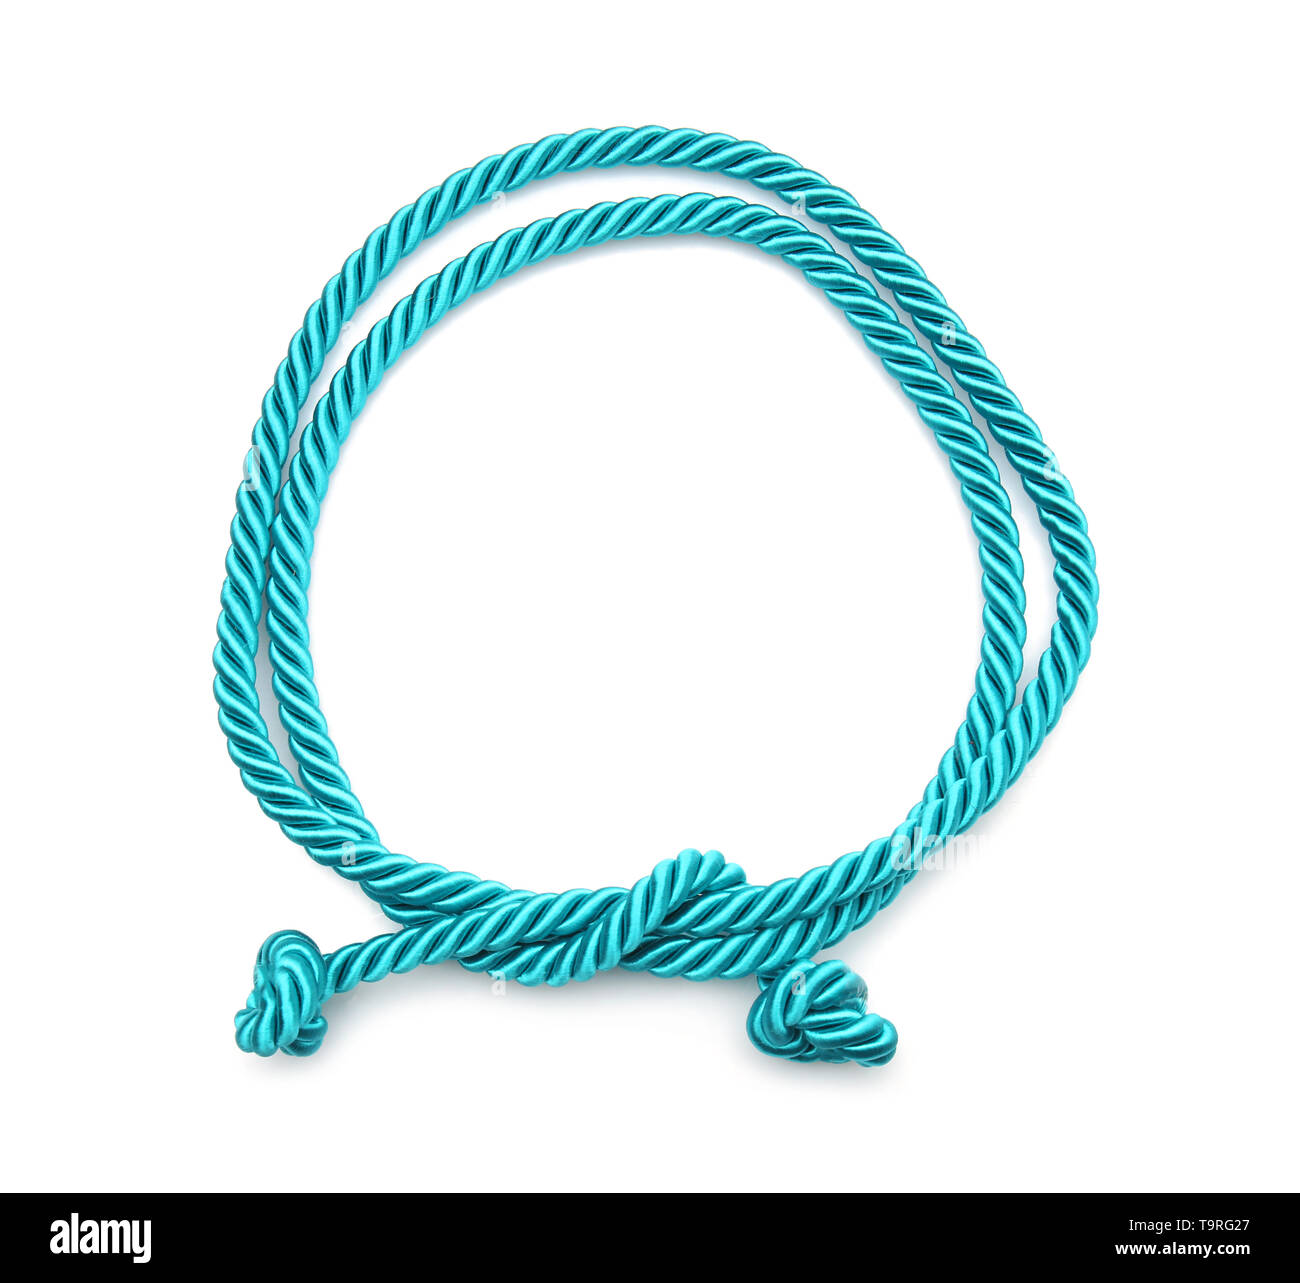 Frame made of rope on white background Stock Photo